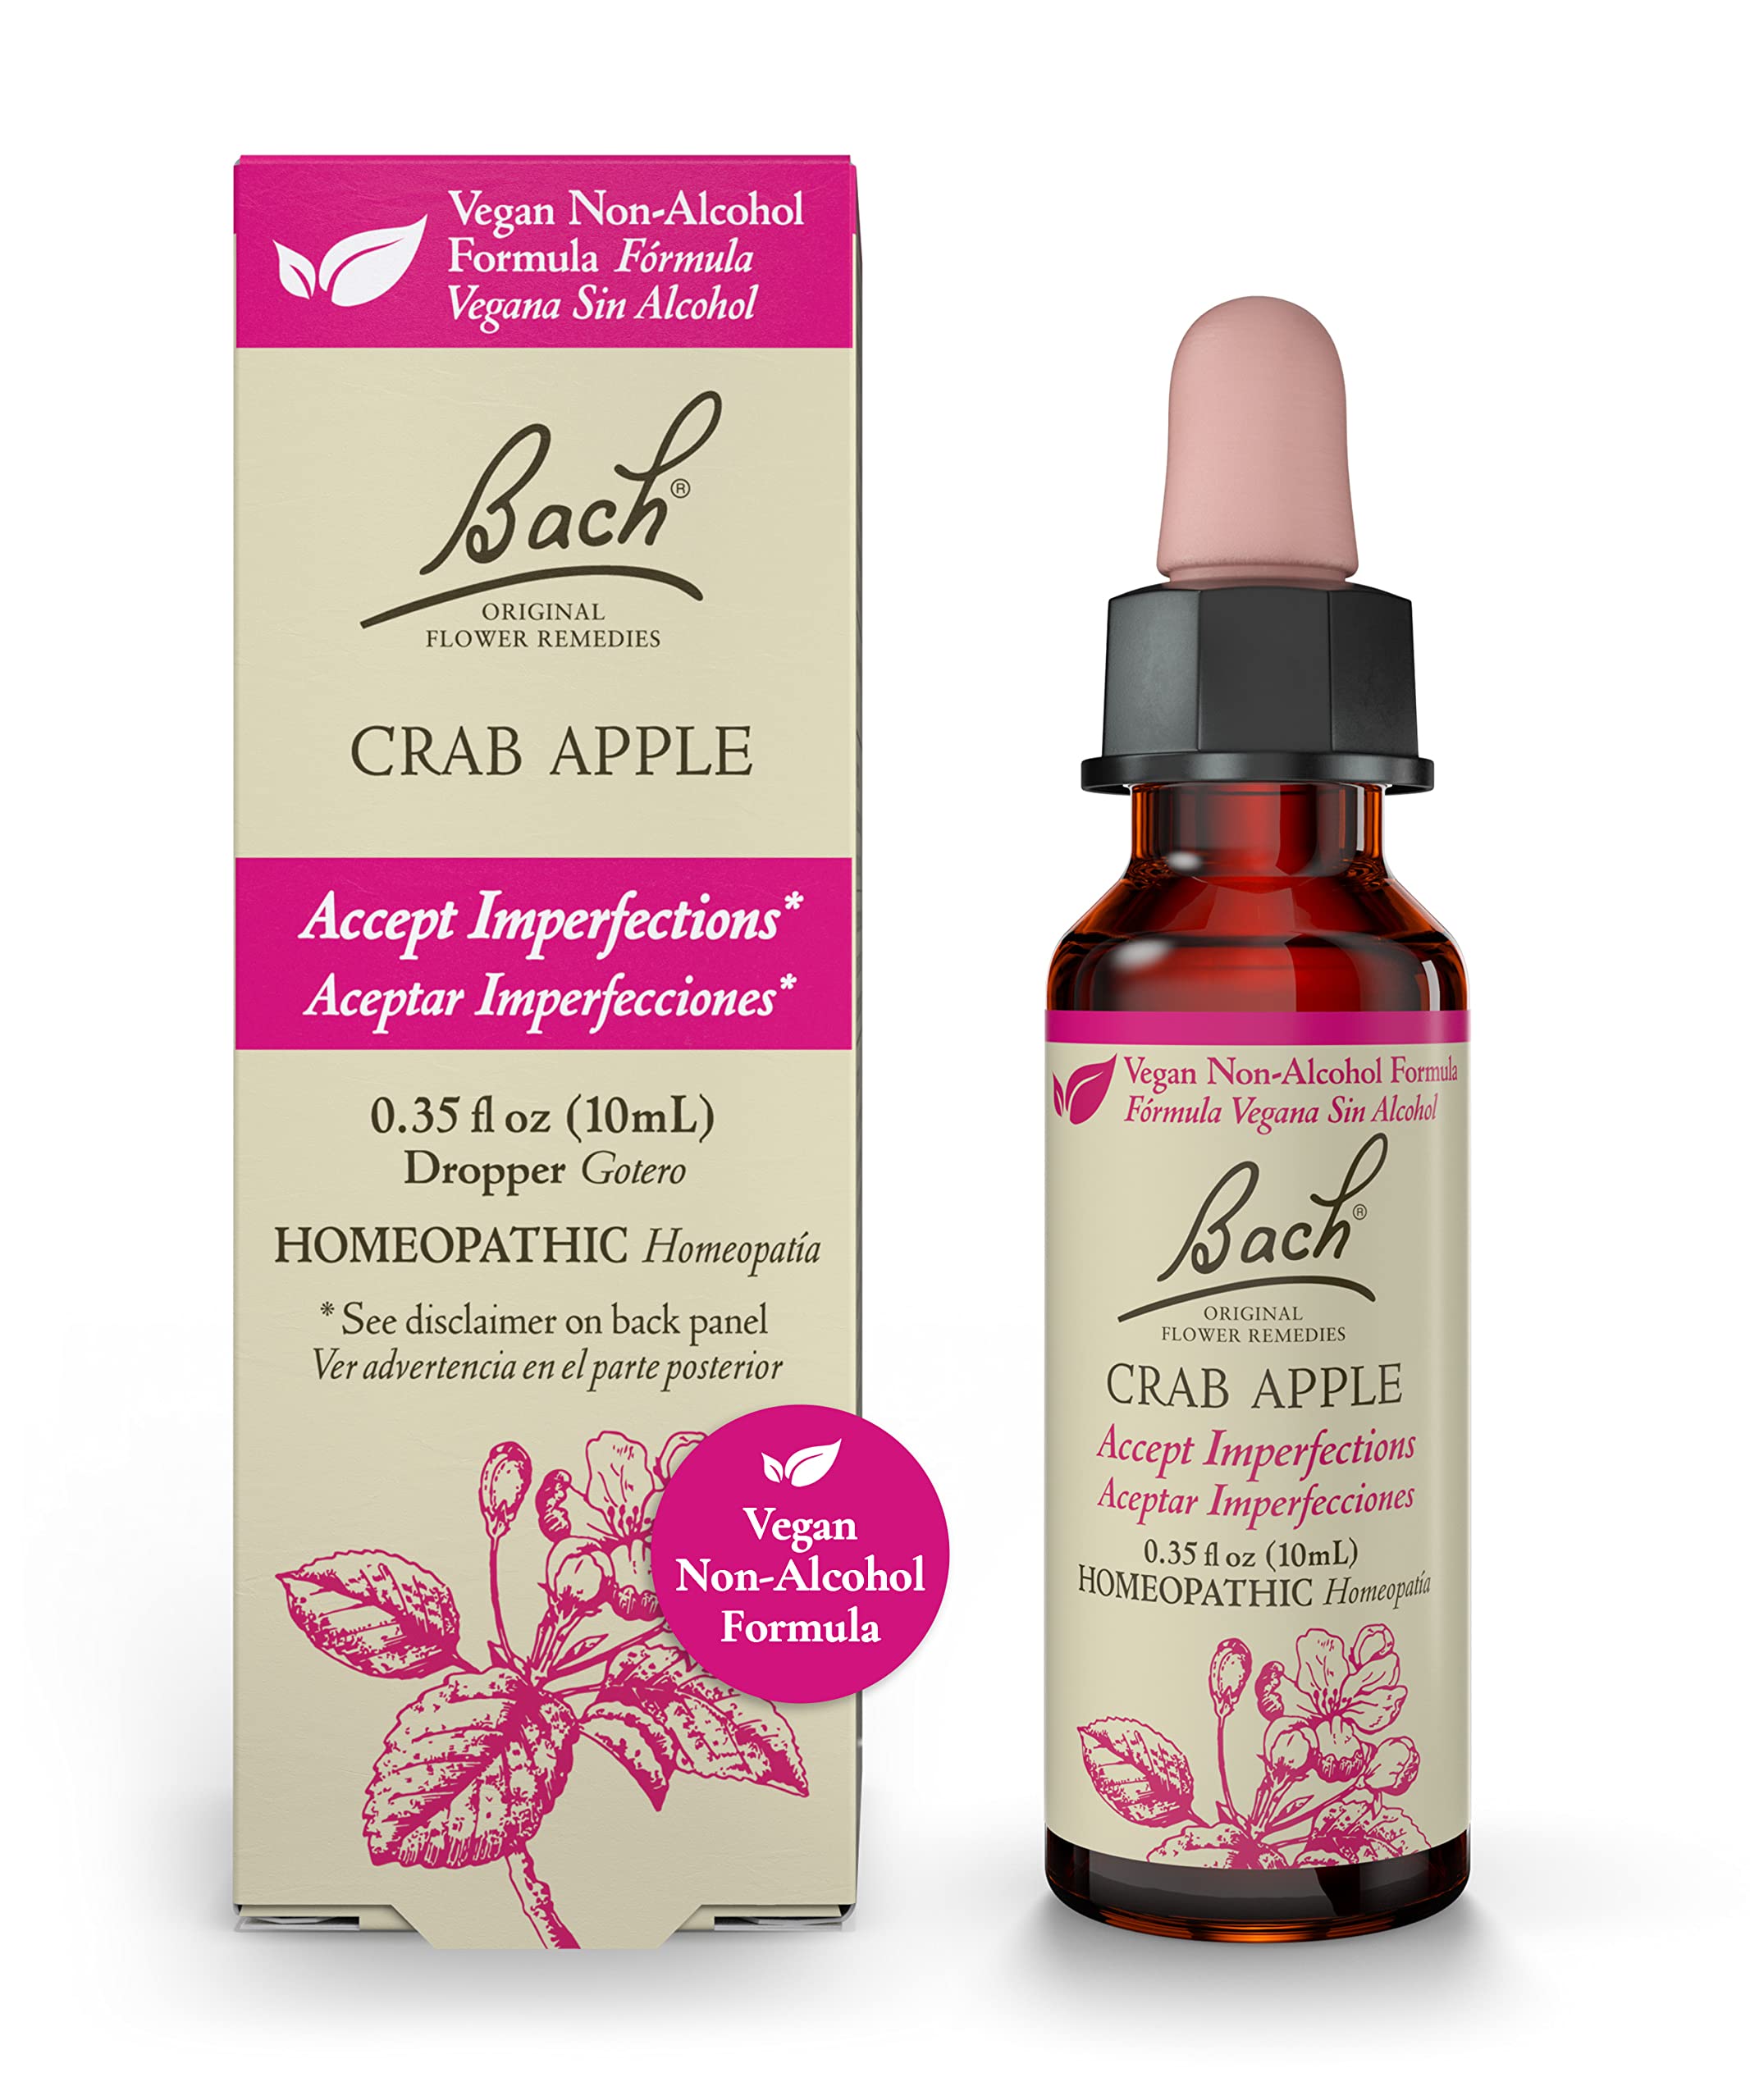 Bach Original Flower Remedies, Crab Apple for Accepting Imperfections (Non-Alcohol Formula), Natural Homeopathic Flower Essence, Holistic Wellness and Stress Relief, Vegan, 10mL Dropper